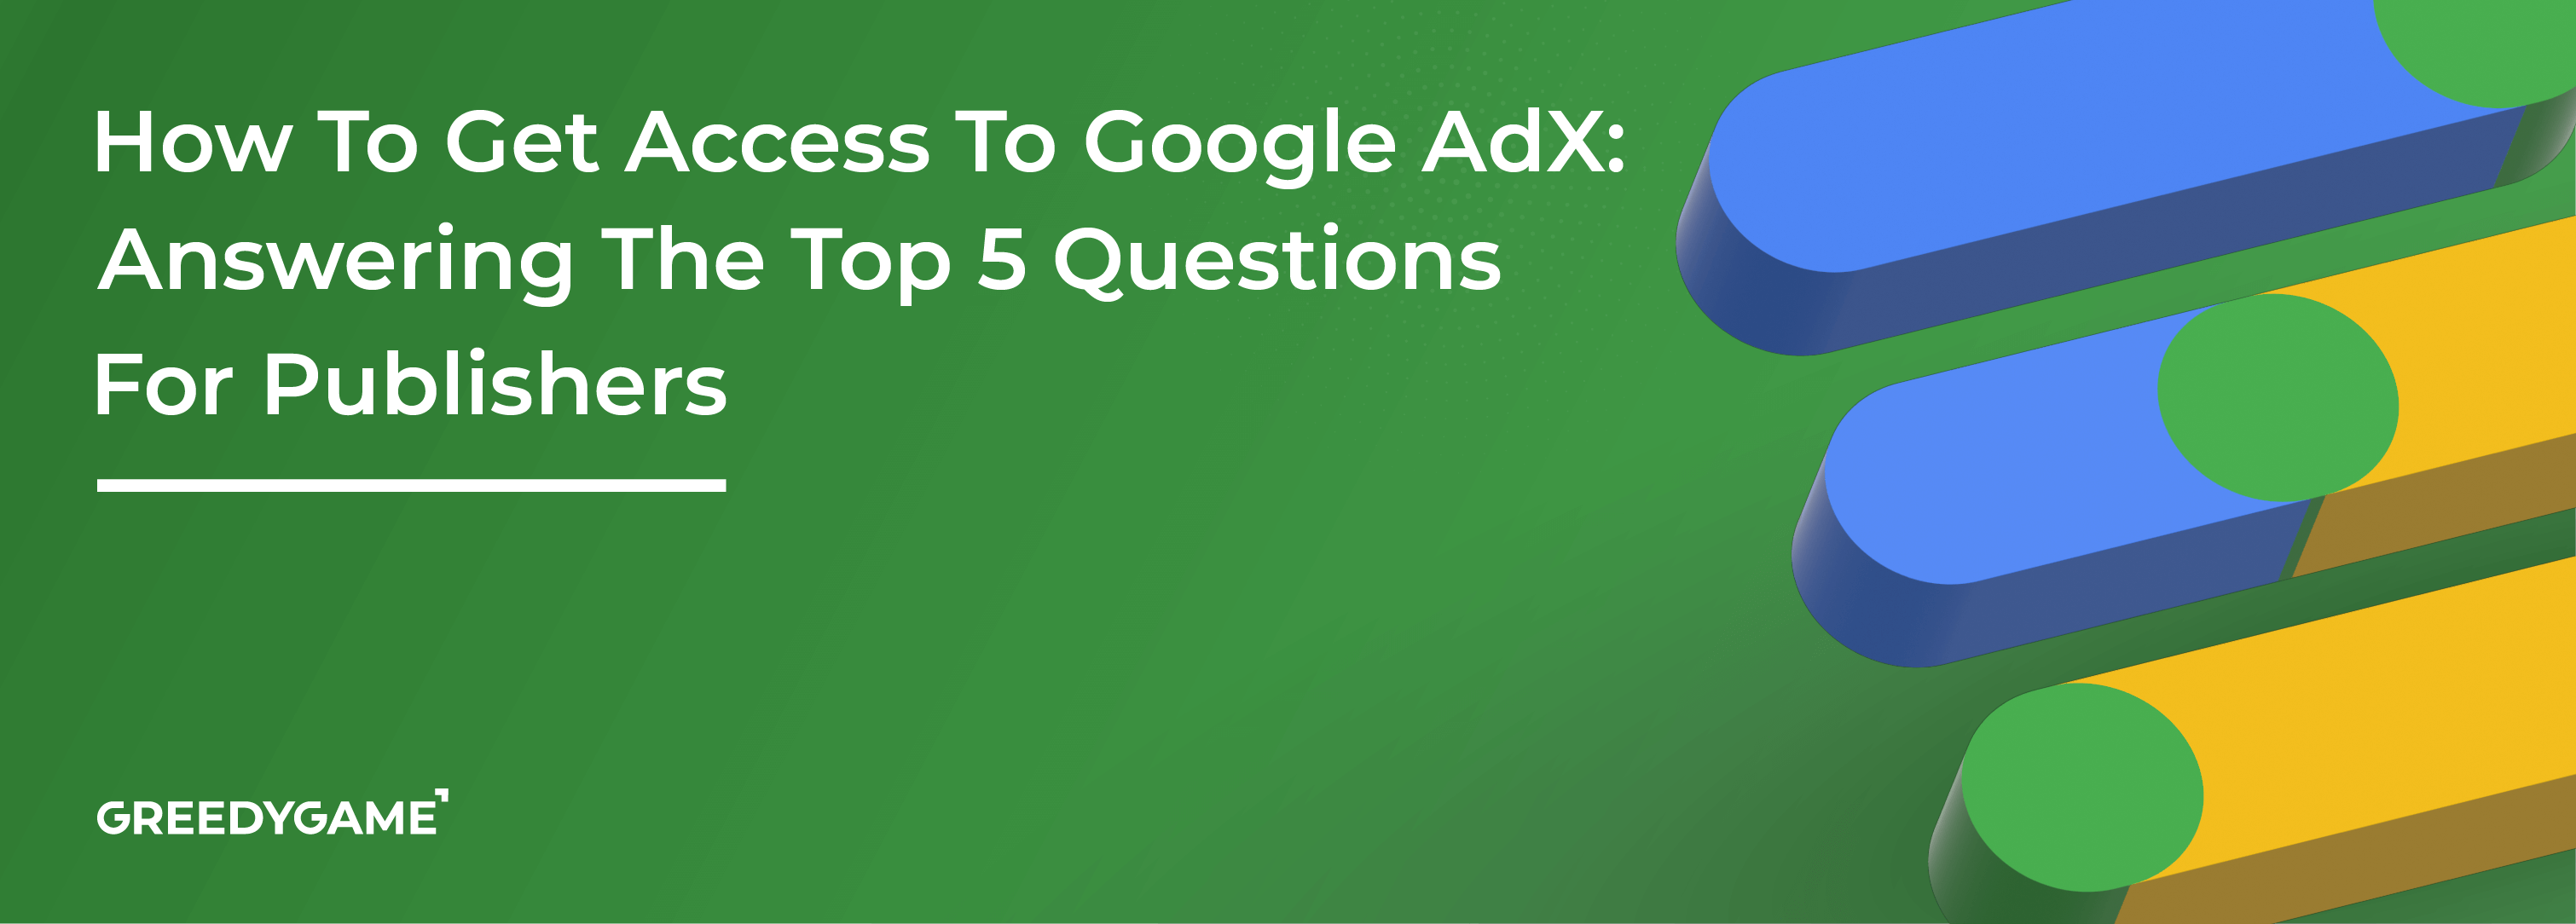 How To Get Access To Google AdX: Answering The Top 5 Questions For Publishers